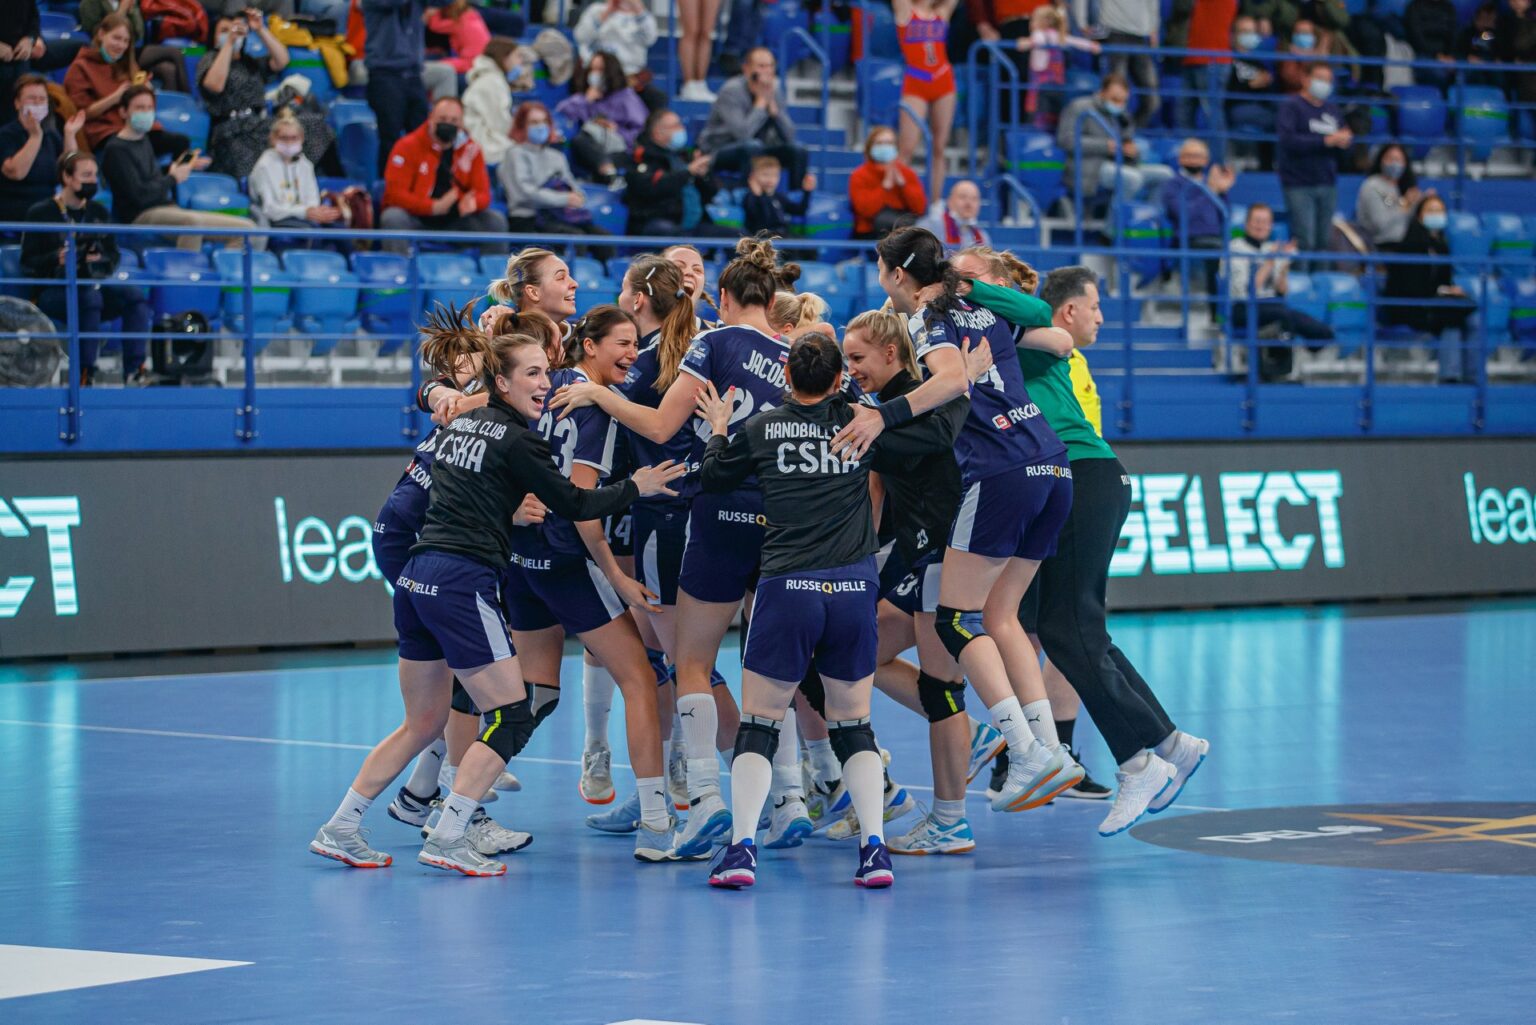 Györi, Brest, Vipers and CSKA reached DELO EHF Champions league final